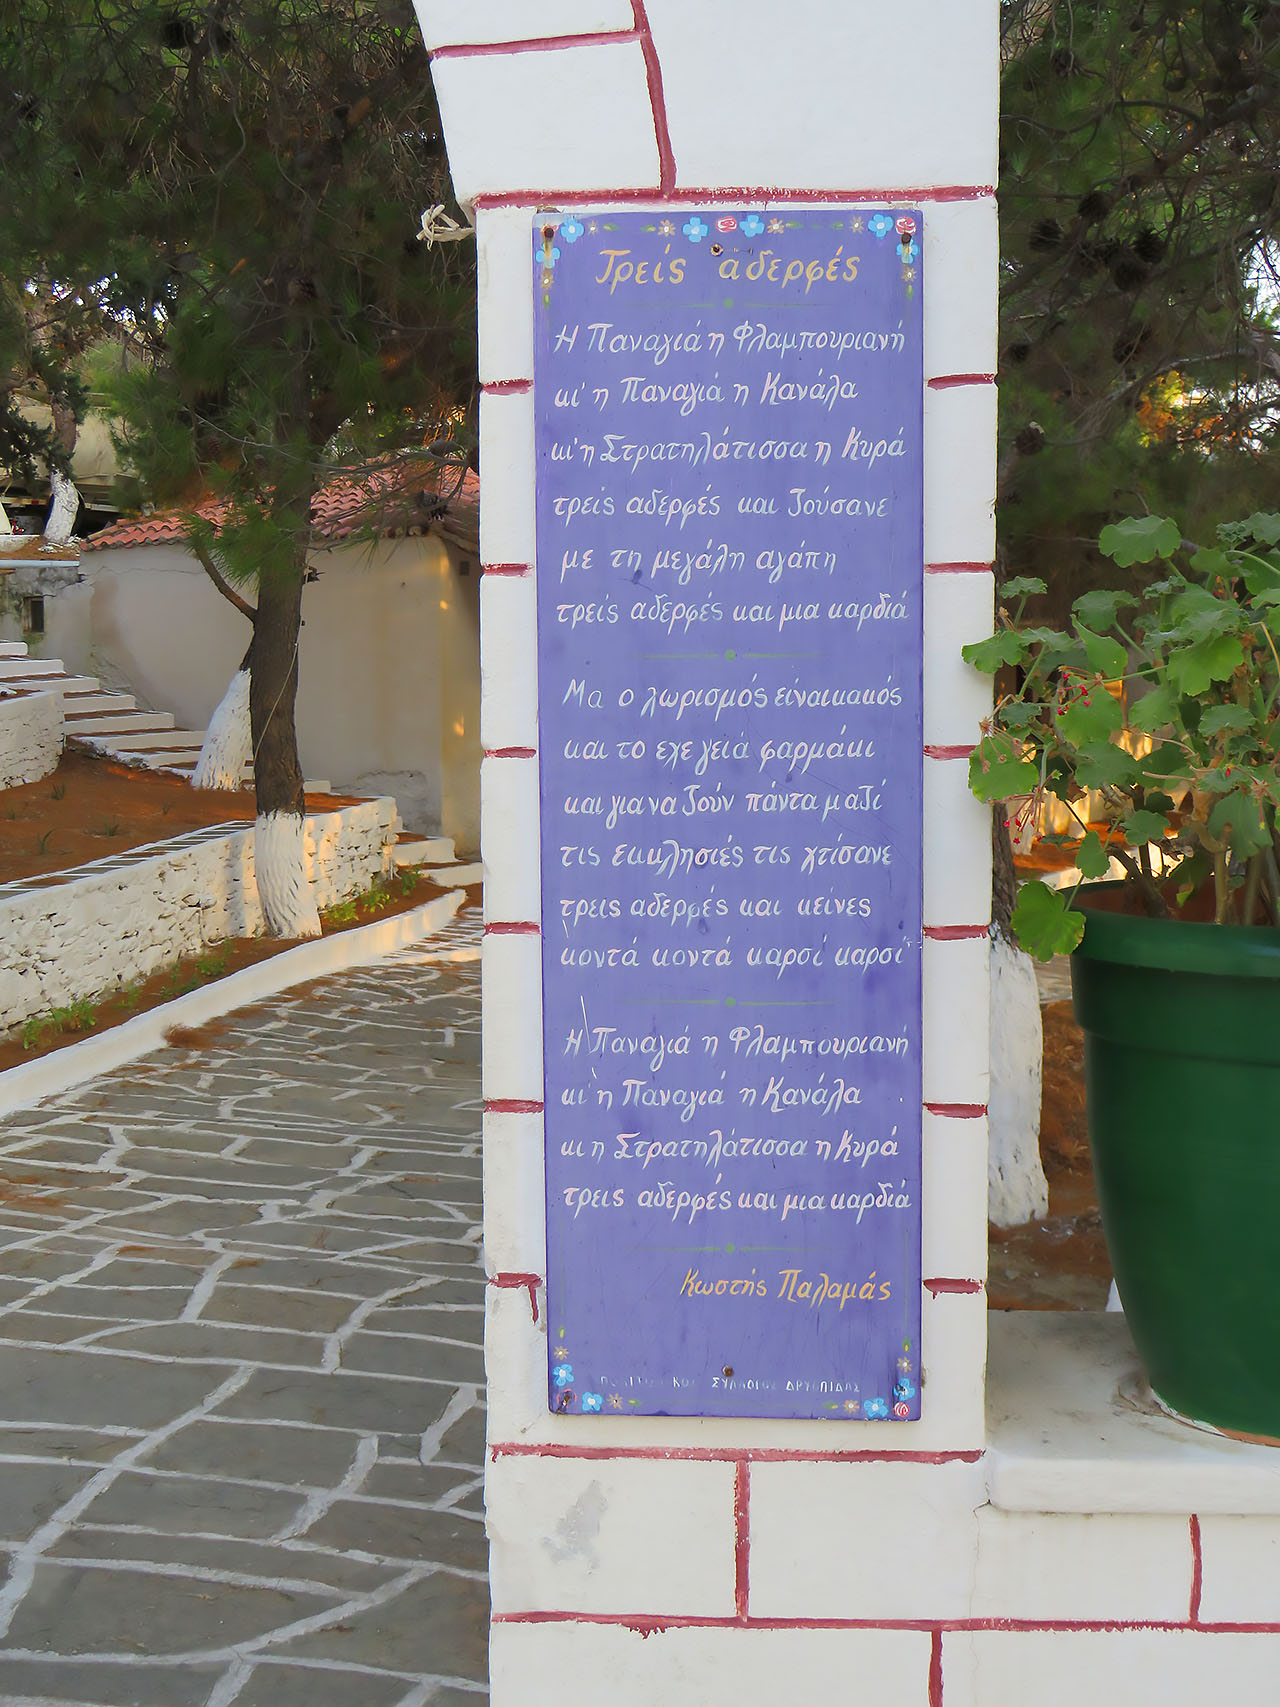 A sign with a poem from Kostis Palamas, a central figure of the Greek literary generation of the 1880s